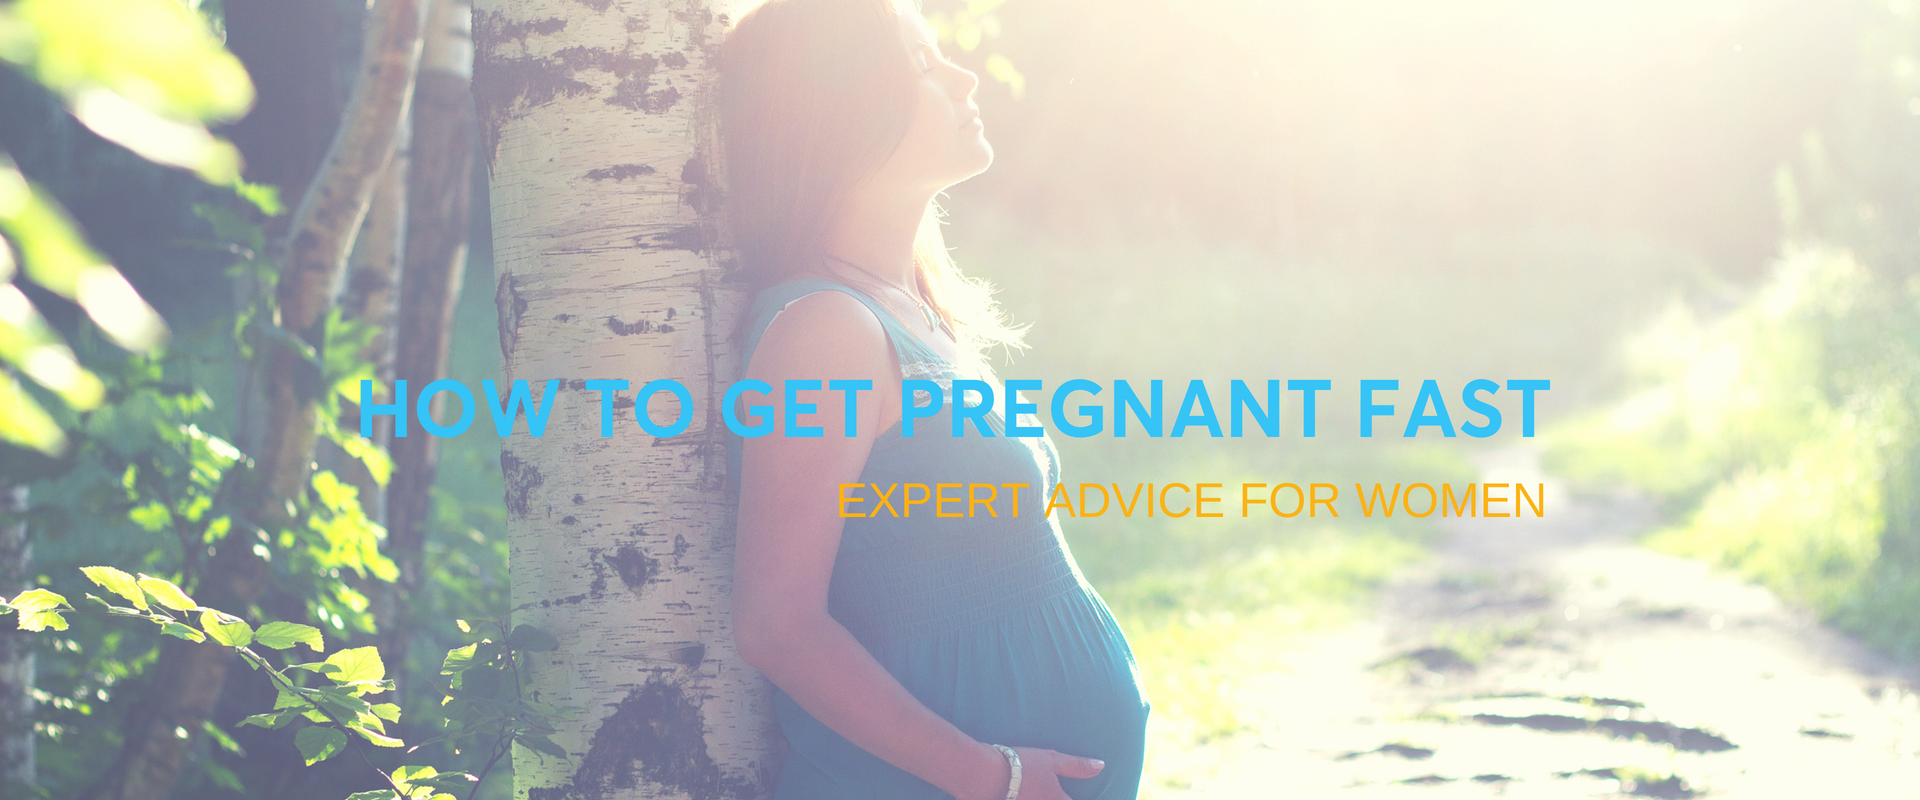 HOW TO GET PREGNANT FAST_BLOG BANNER-2